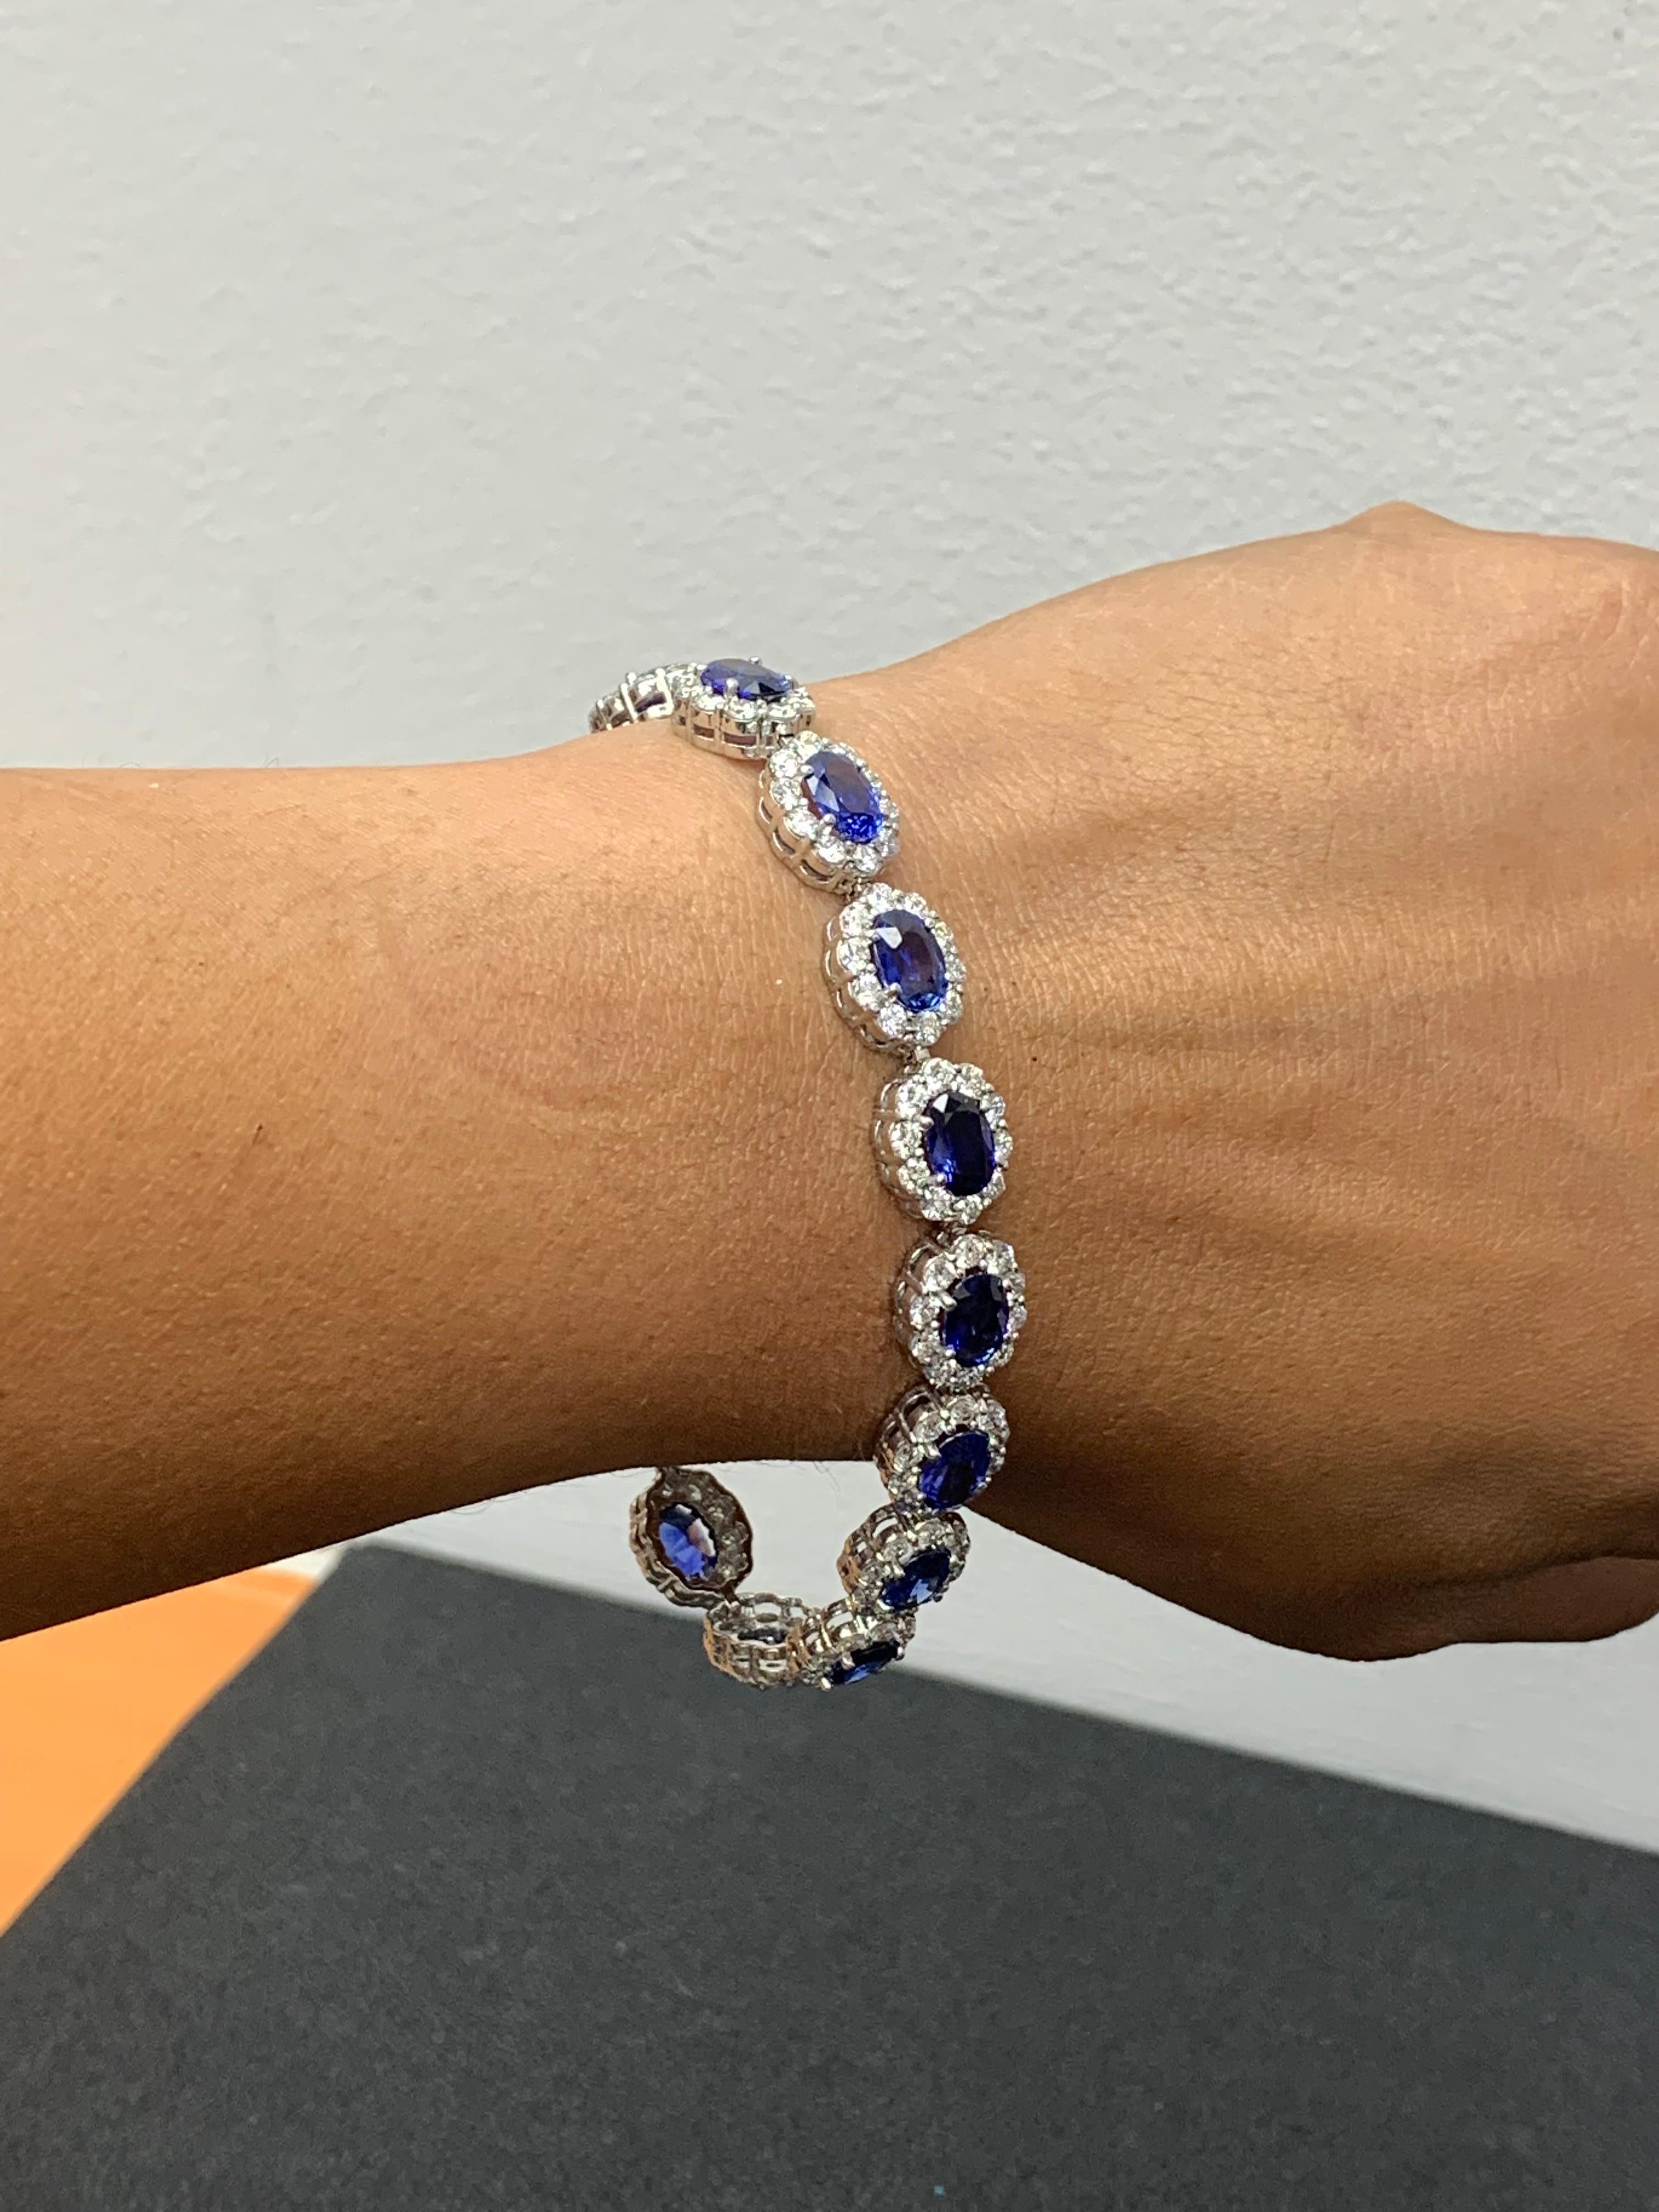 A beautiful Blue sapphire and diamond bracelet showcasing color-rich blue sapphires, surrounded by a single row of brilliant round diamonds. 16 Oval cut blue sapphires weigh 13.88 carats total; 160 accent diamonds weigh 7.13 carats total.

Style is